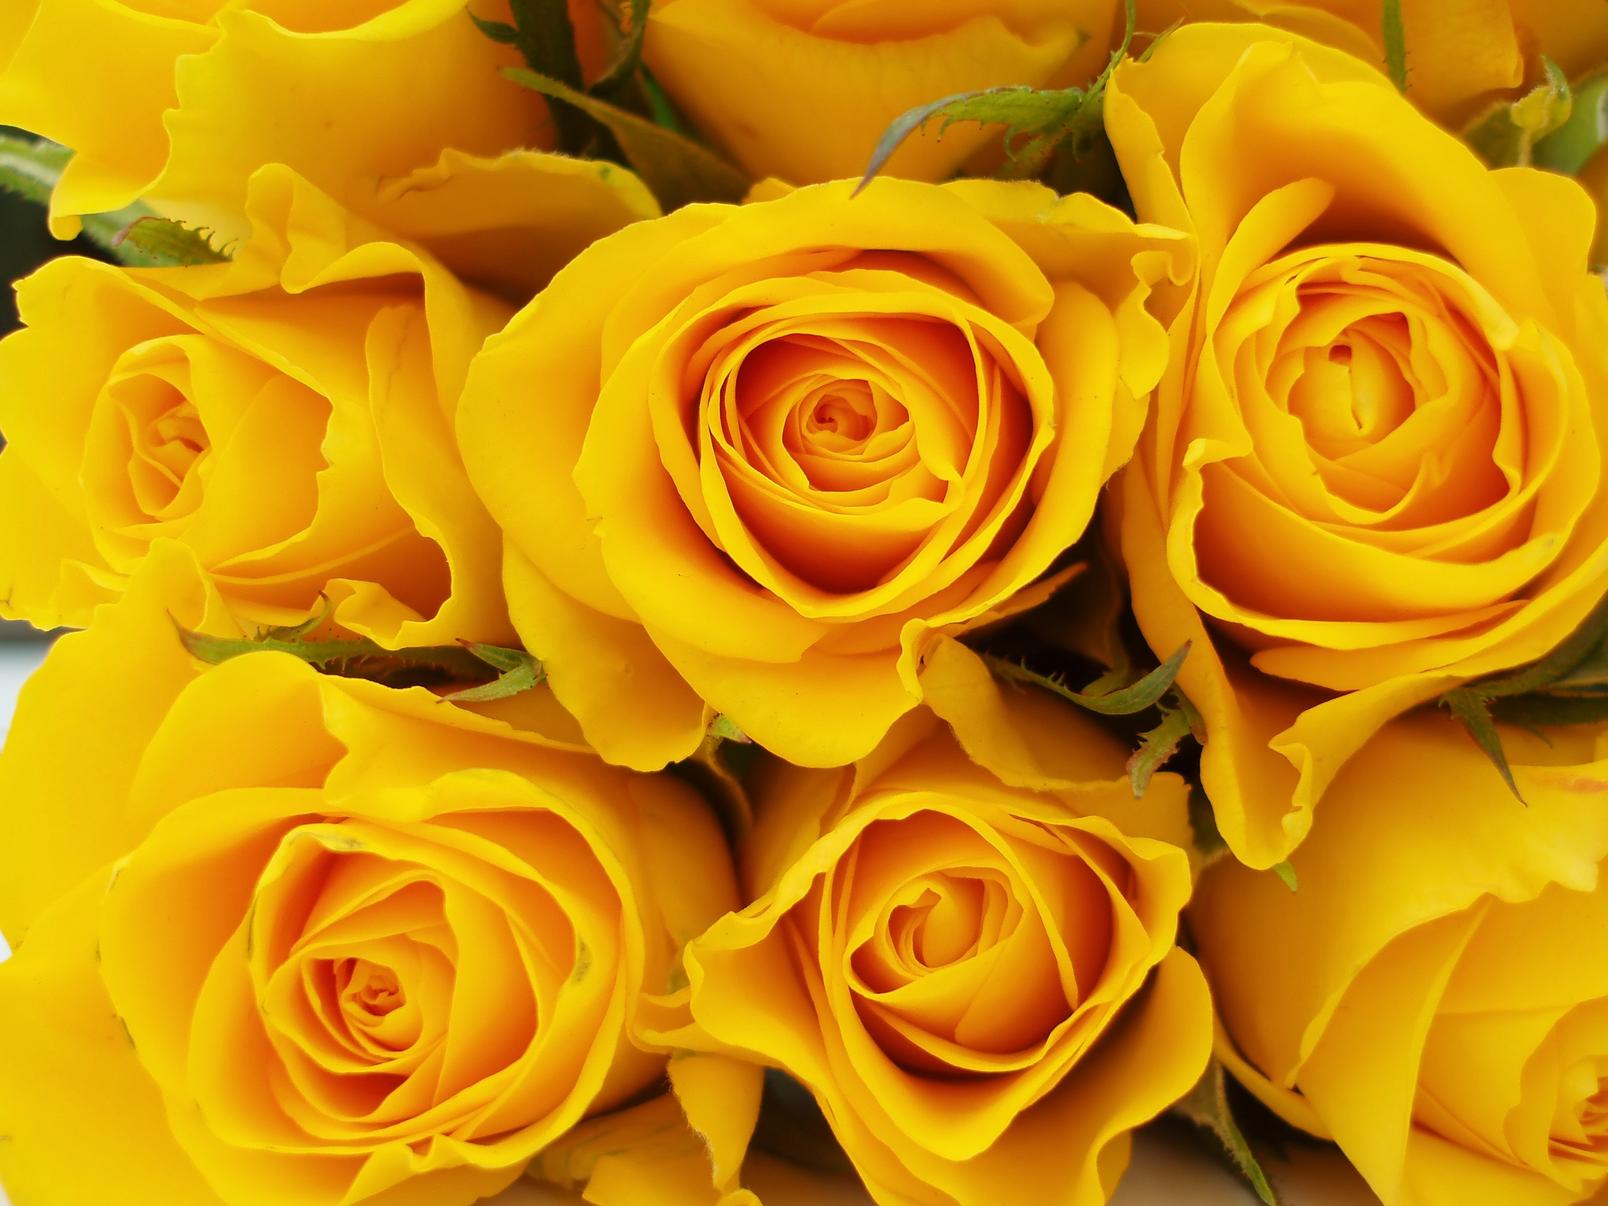 roses-yellow-flowers-bunch